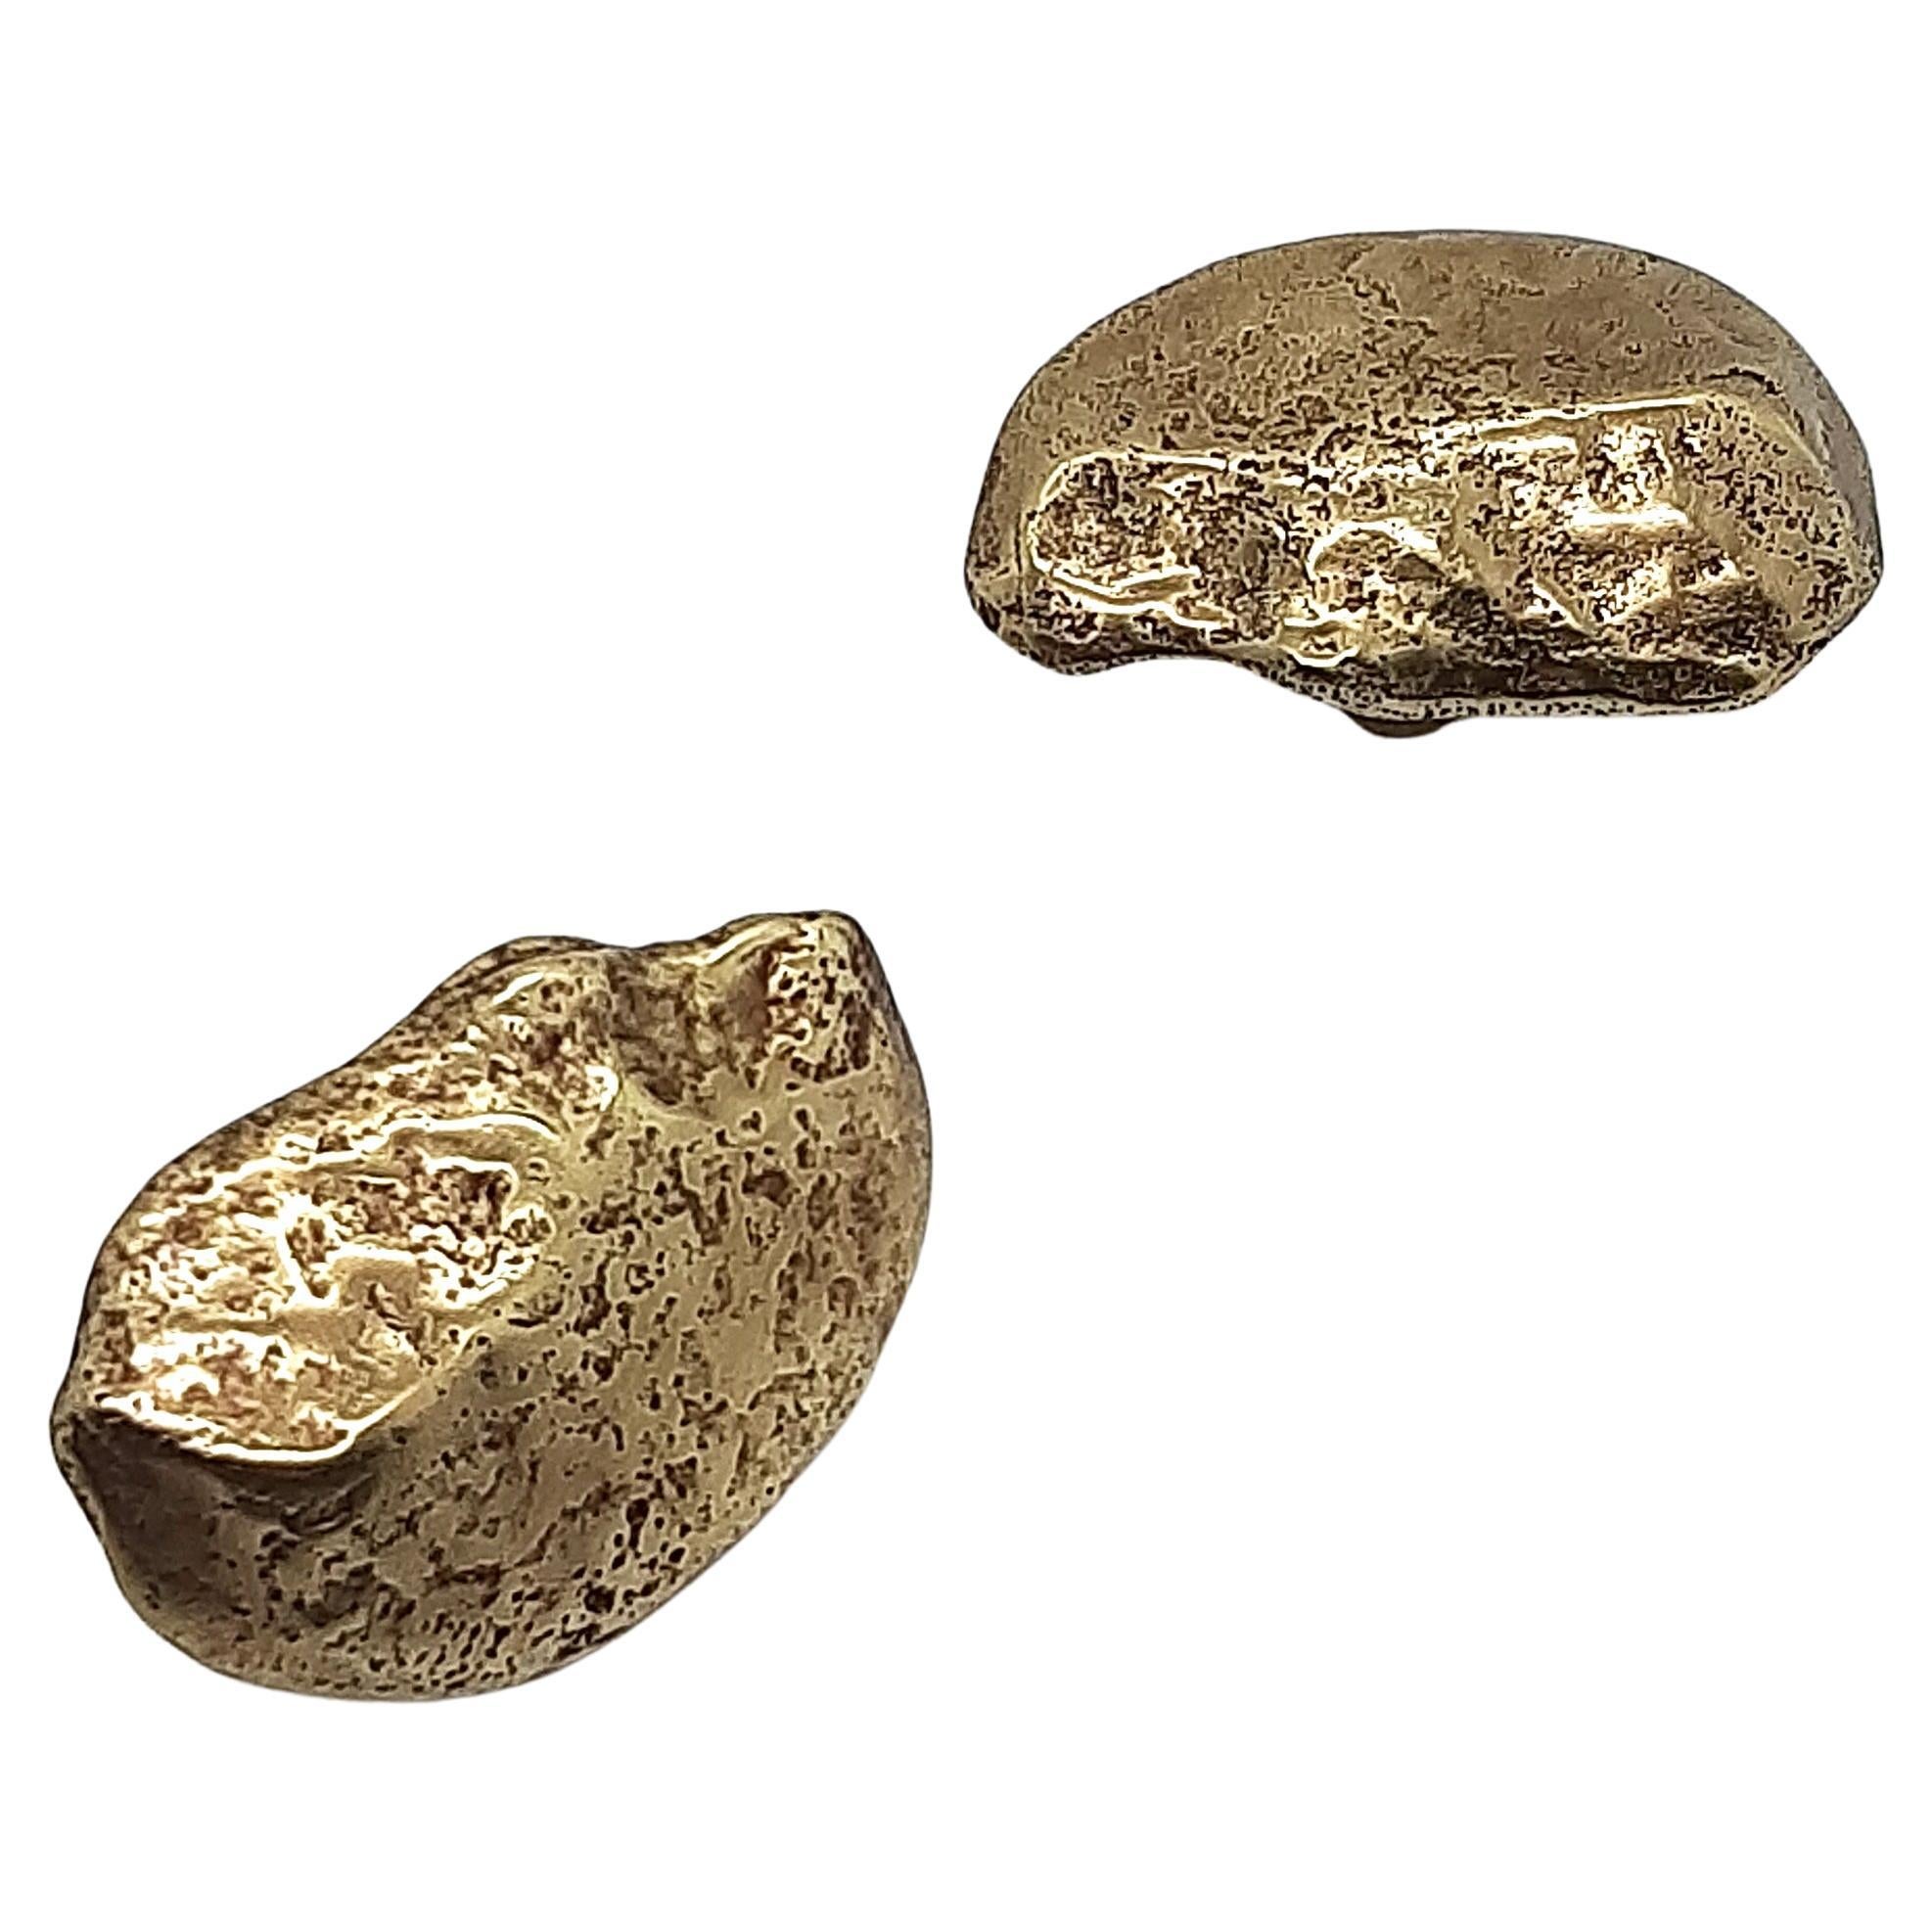 Solid Brass Door Knobs Mineral Inspiration 7 x 5 cm For Sale